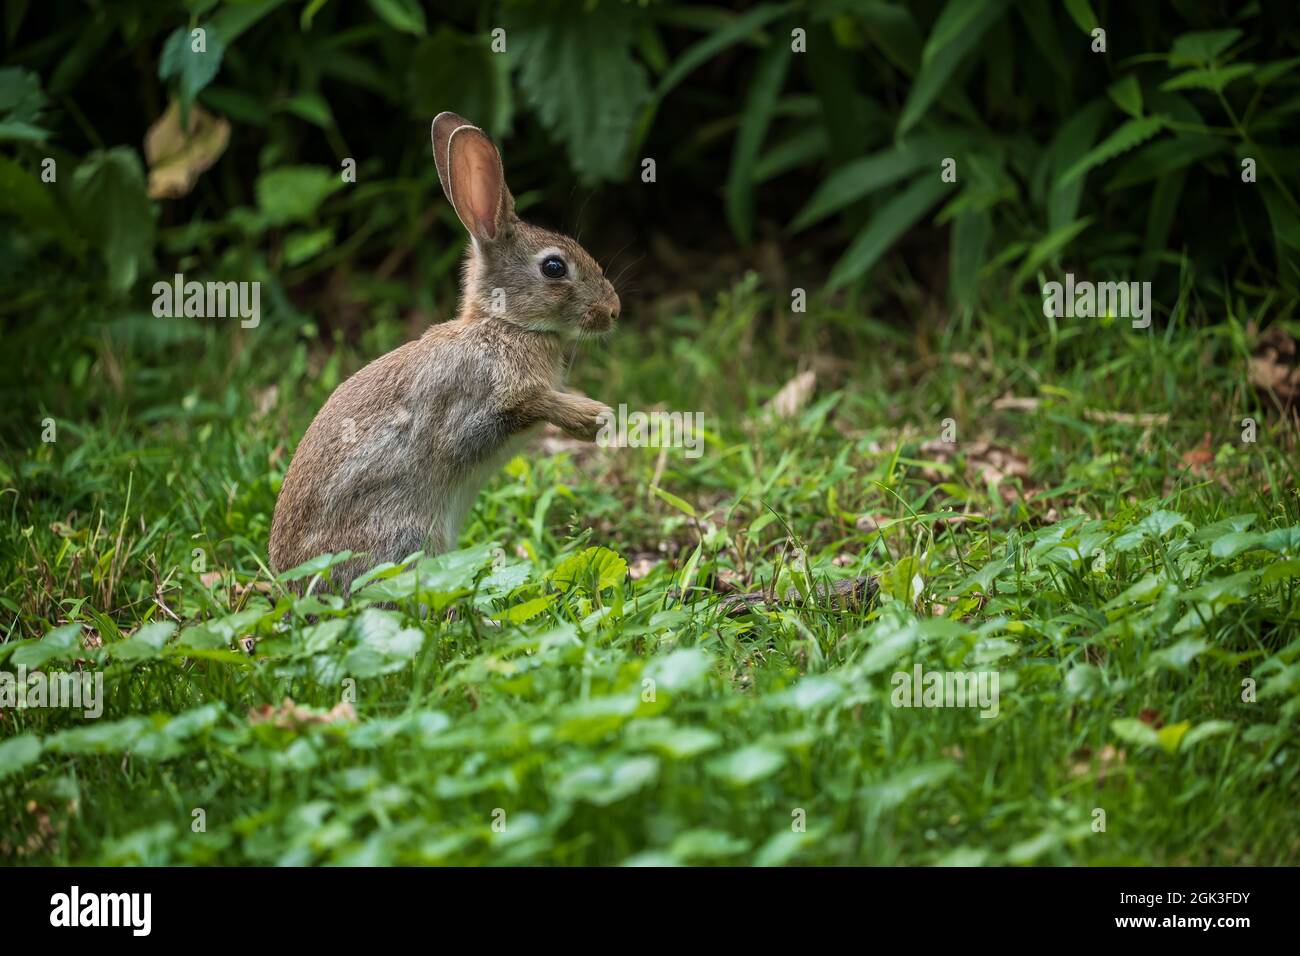 Wild rabbit standing on two legs in the meadow, young bunny juvenile, cute small mammal in the family: Leporidae Stock Photo